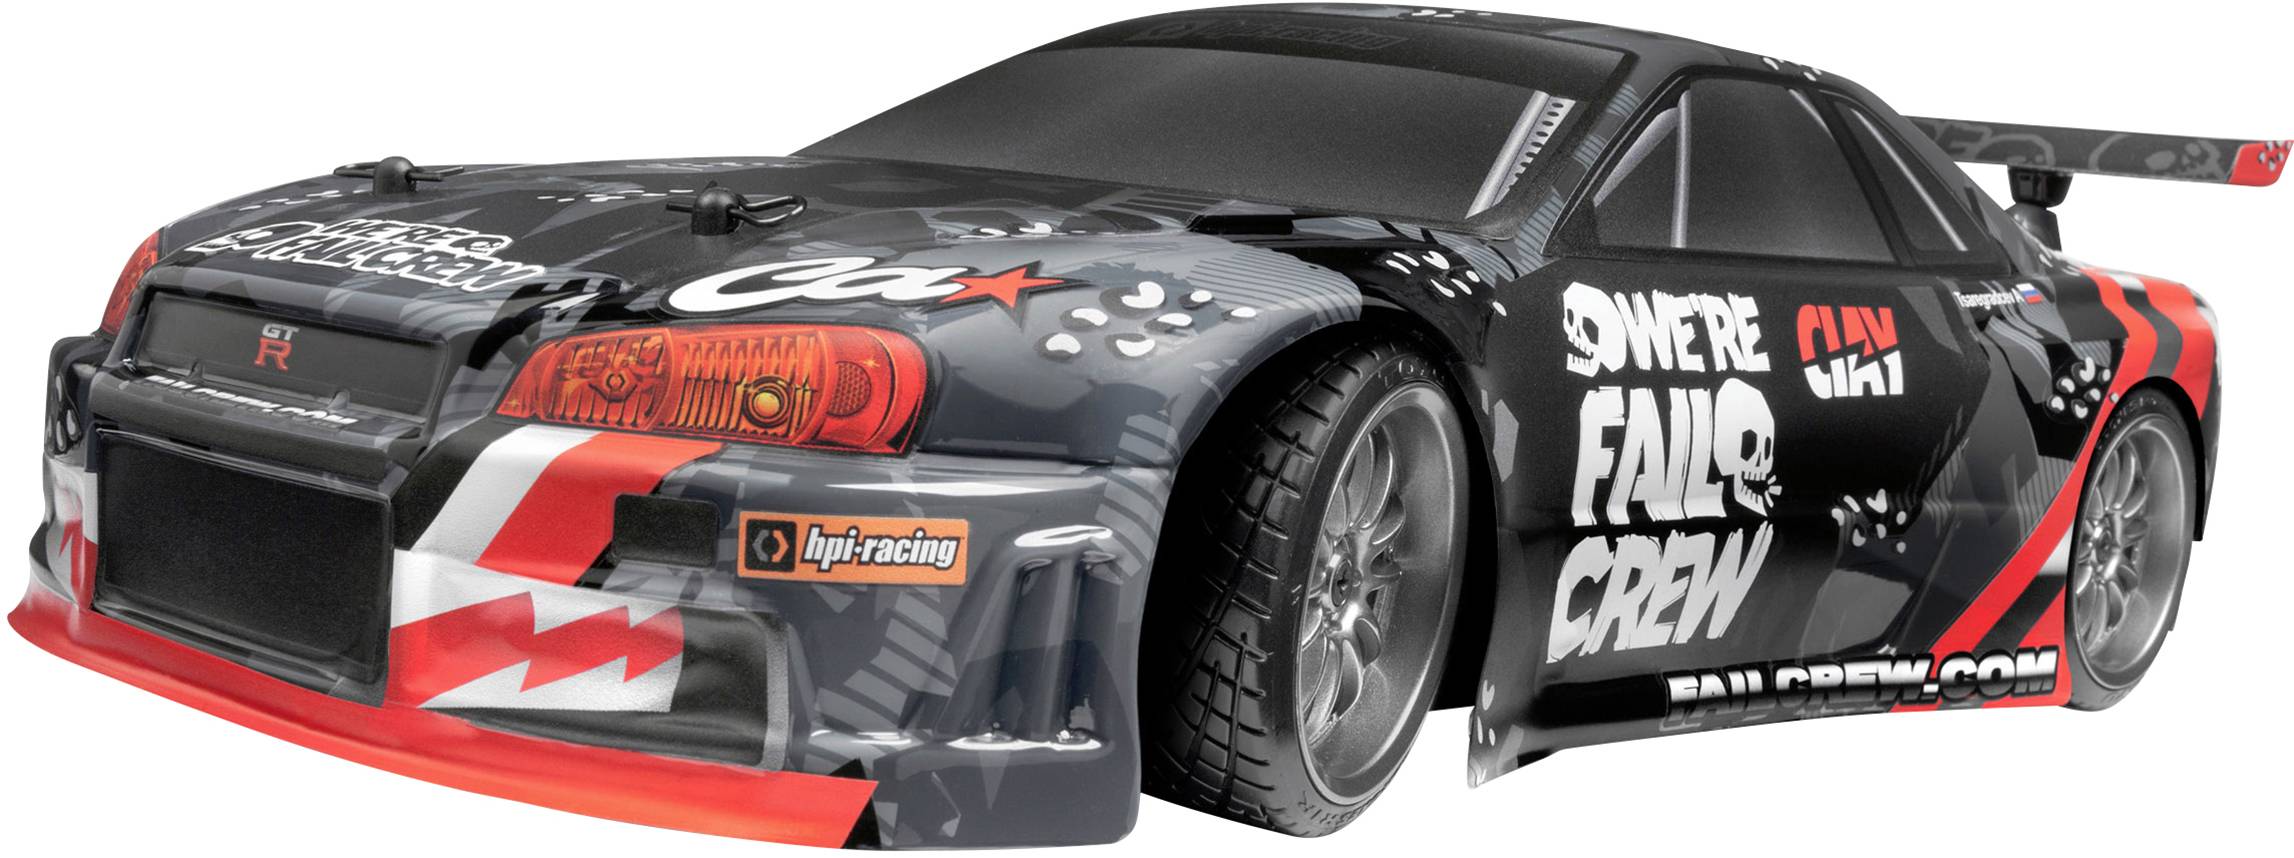 Sortie avond Levering HPI Racing E10 Drift Nissan Skyline R34 GT-R Brushed 1:10 RC model car  Electric Road version 4WD 100% RtR 2,4 GHz Incl | Conrad.com